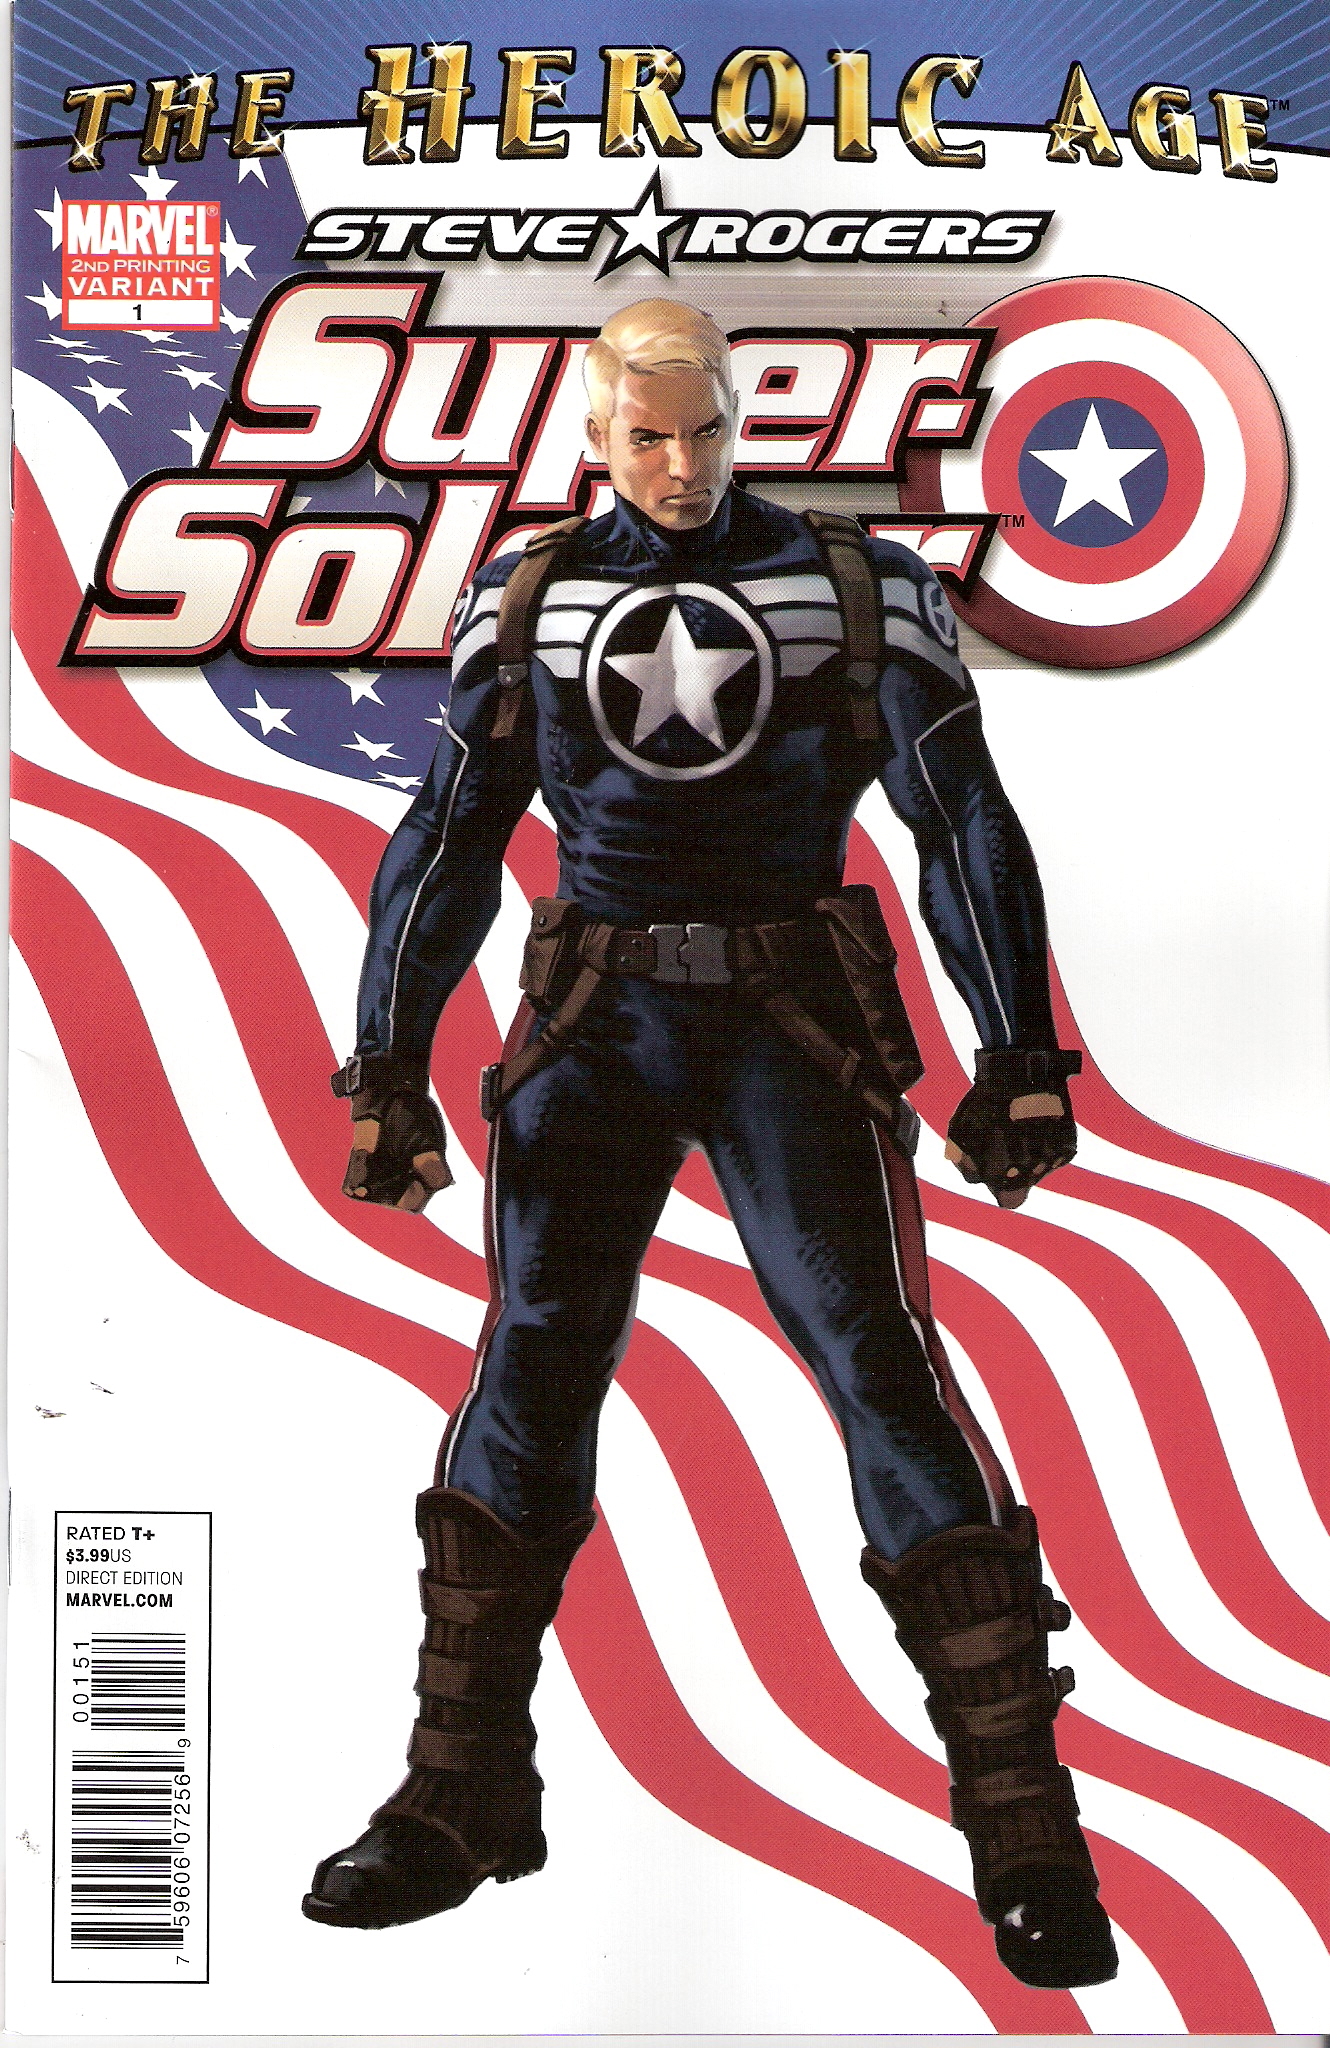 Steve Rogers Super Soldier Poster by Finch 24 x 36 Marvel *NEW SEALED* 